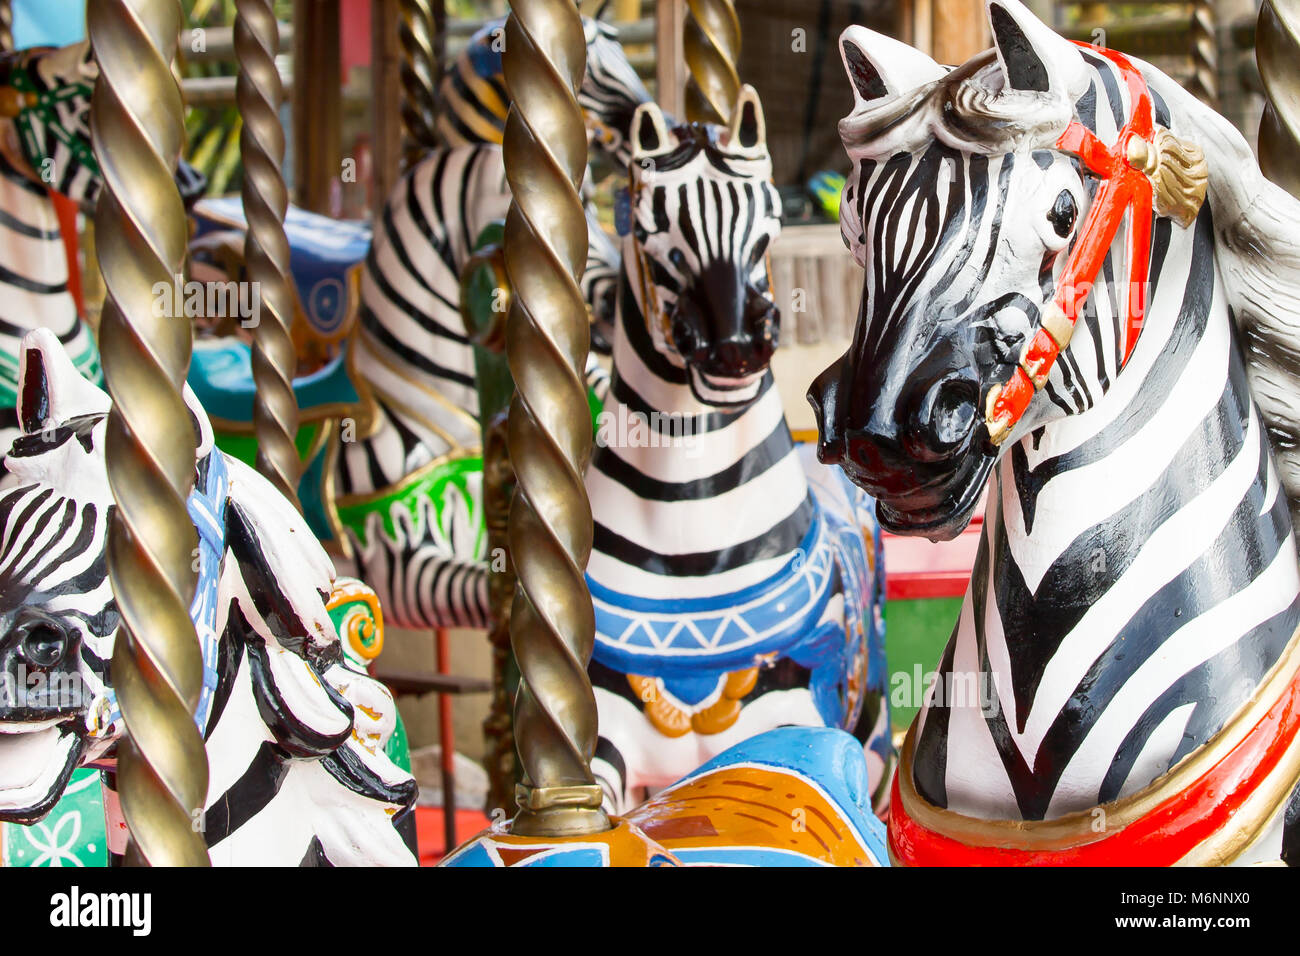 Close up of brightly painted, colourful zebras on a traditional British fairground carousel ride. UK merry-go-round, amusement ride. Stock Photo